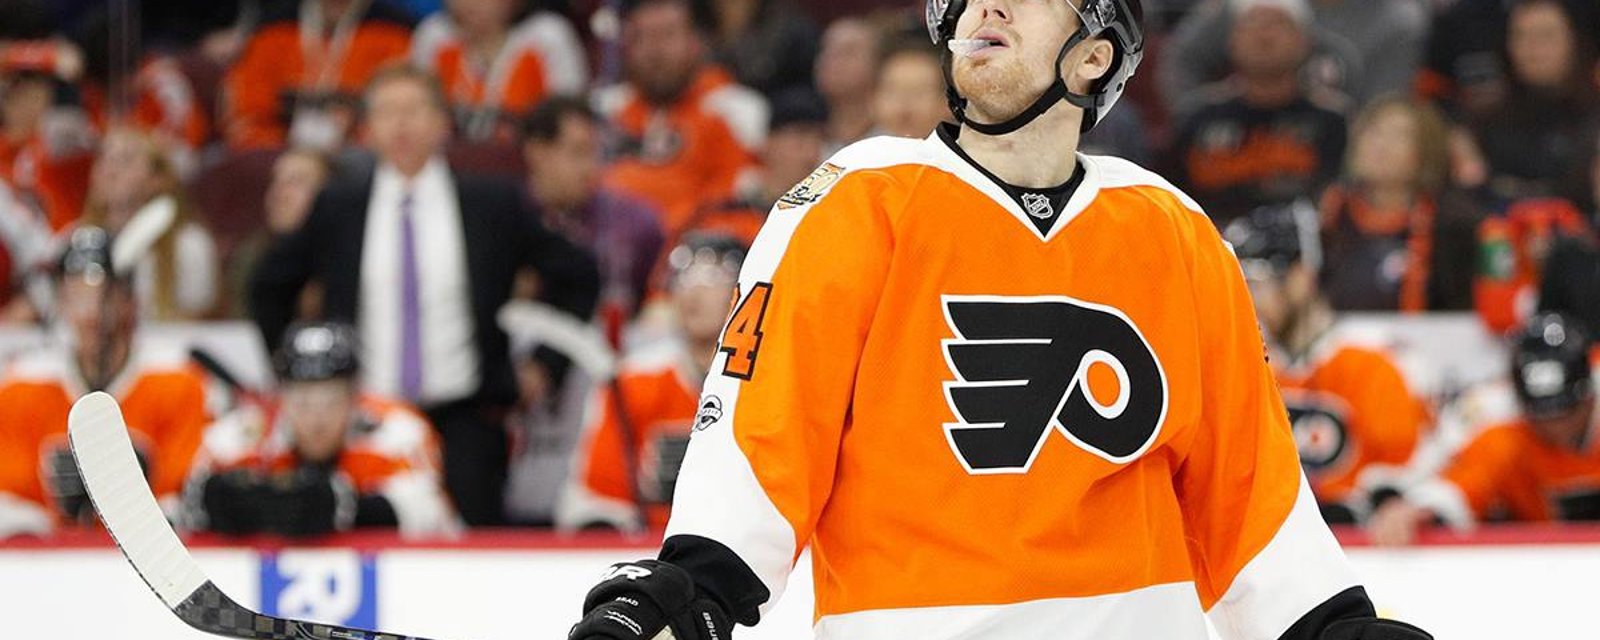 Breaking: The Flyers make surprising call-up!